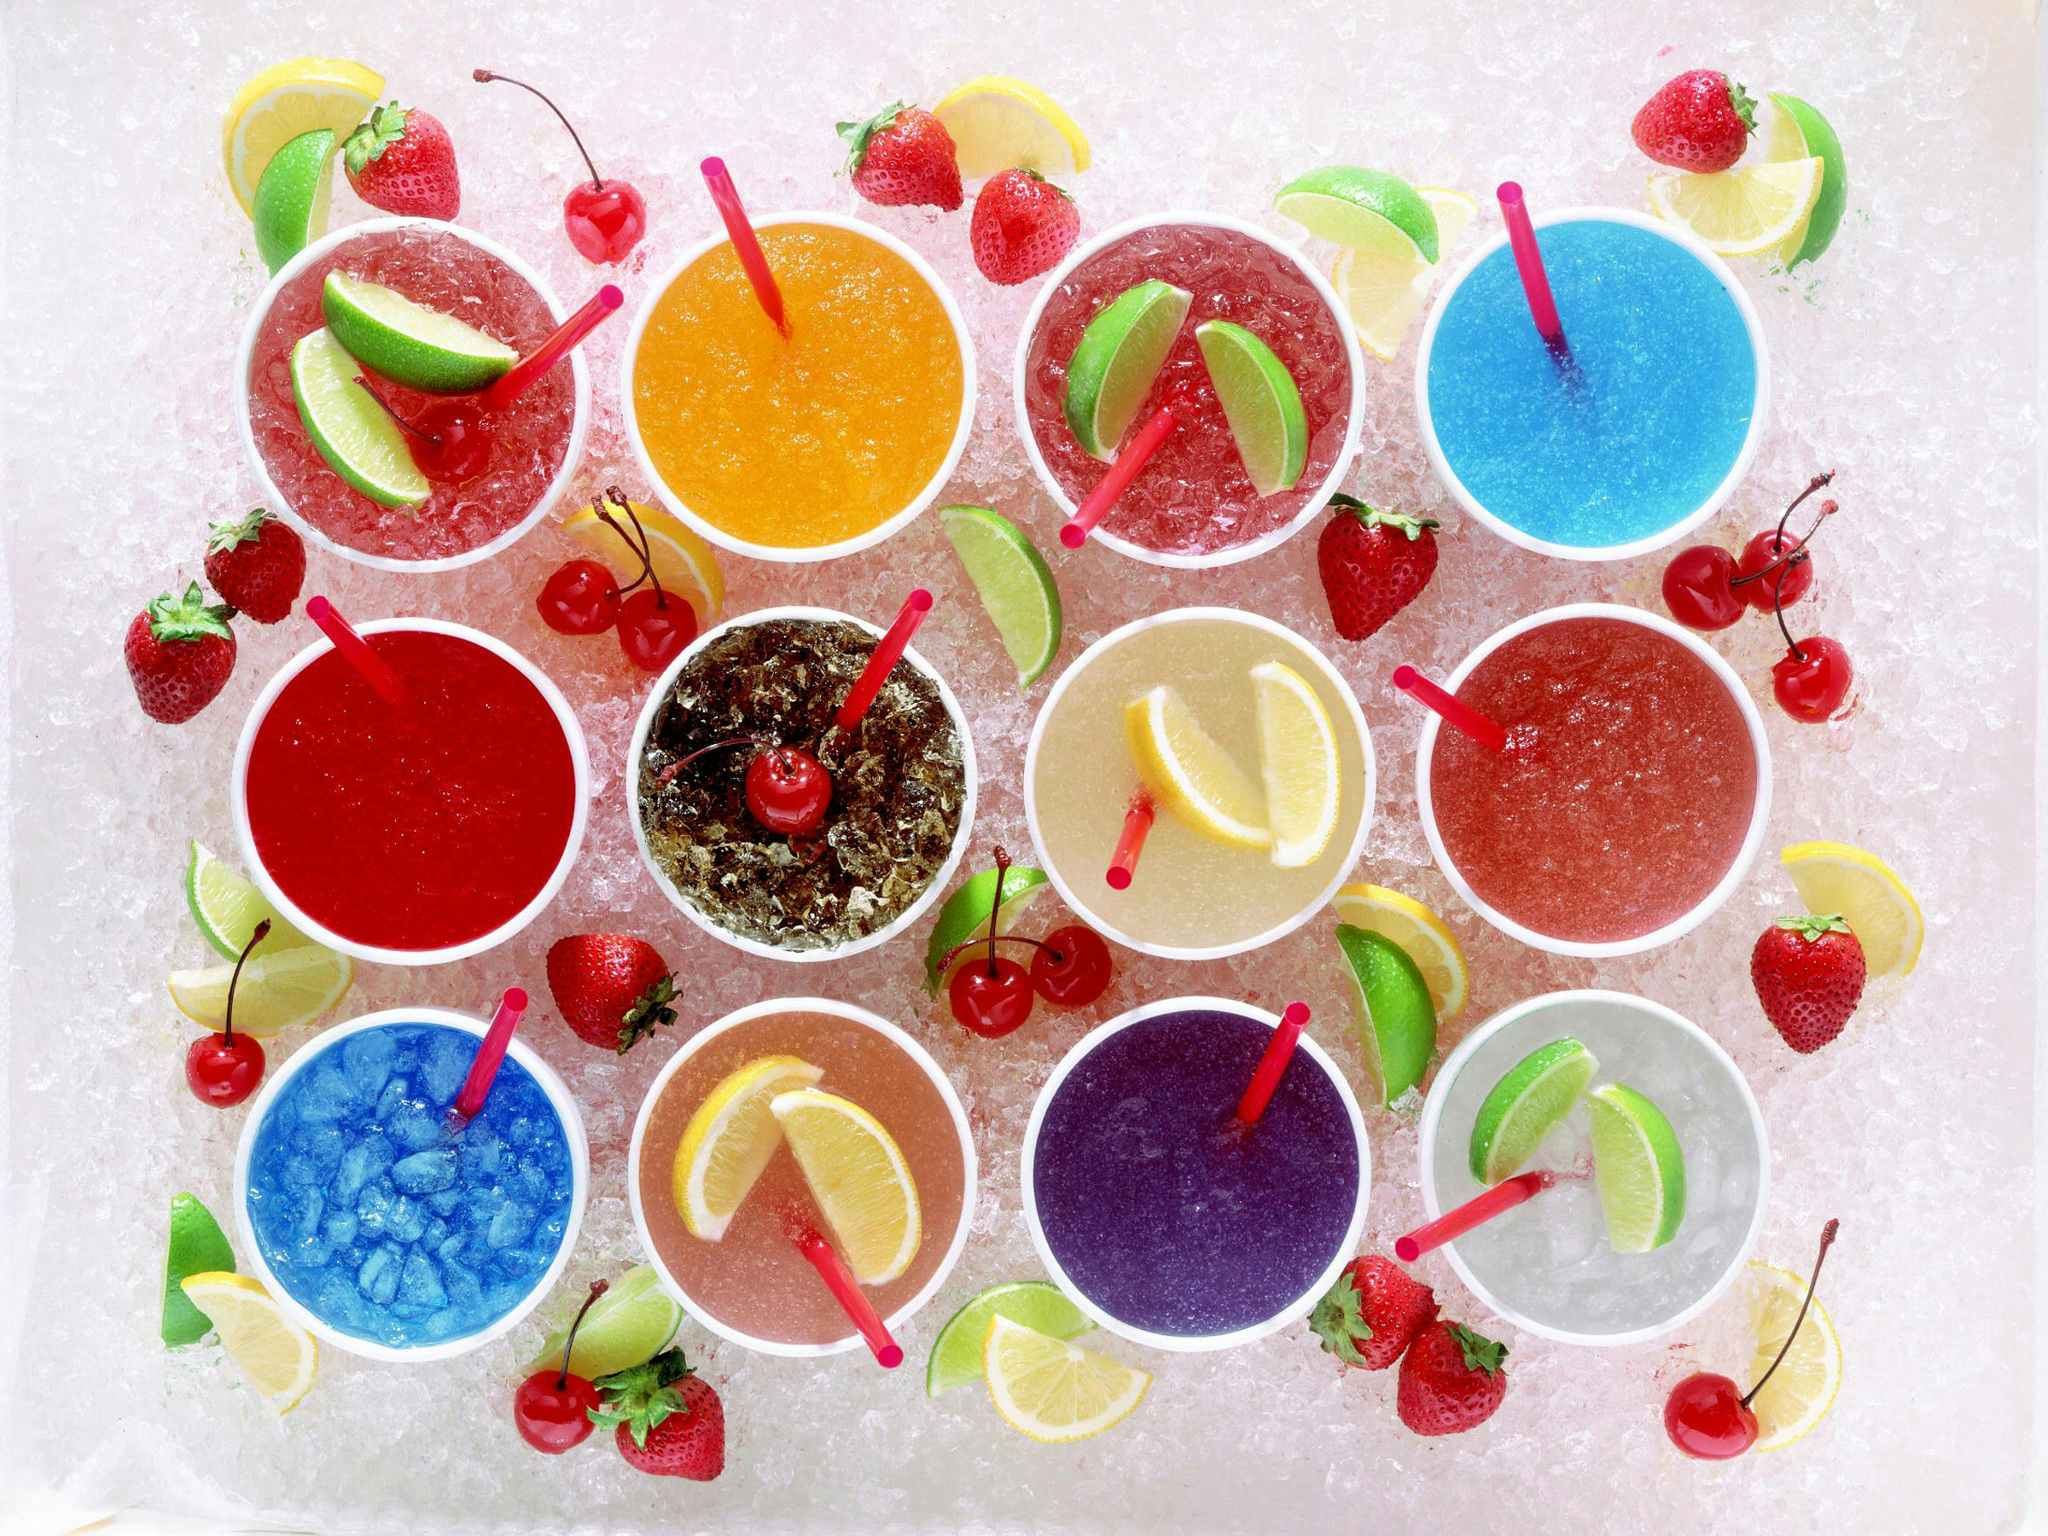 12 drink cups full of colorful beverages sitting on ice.